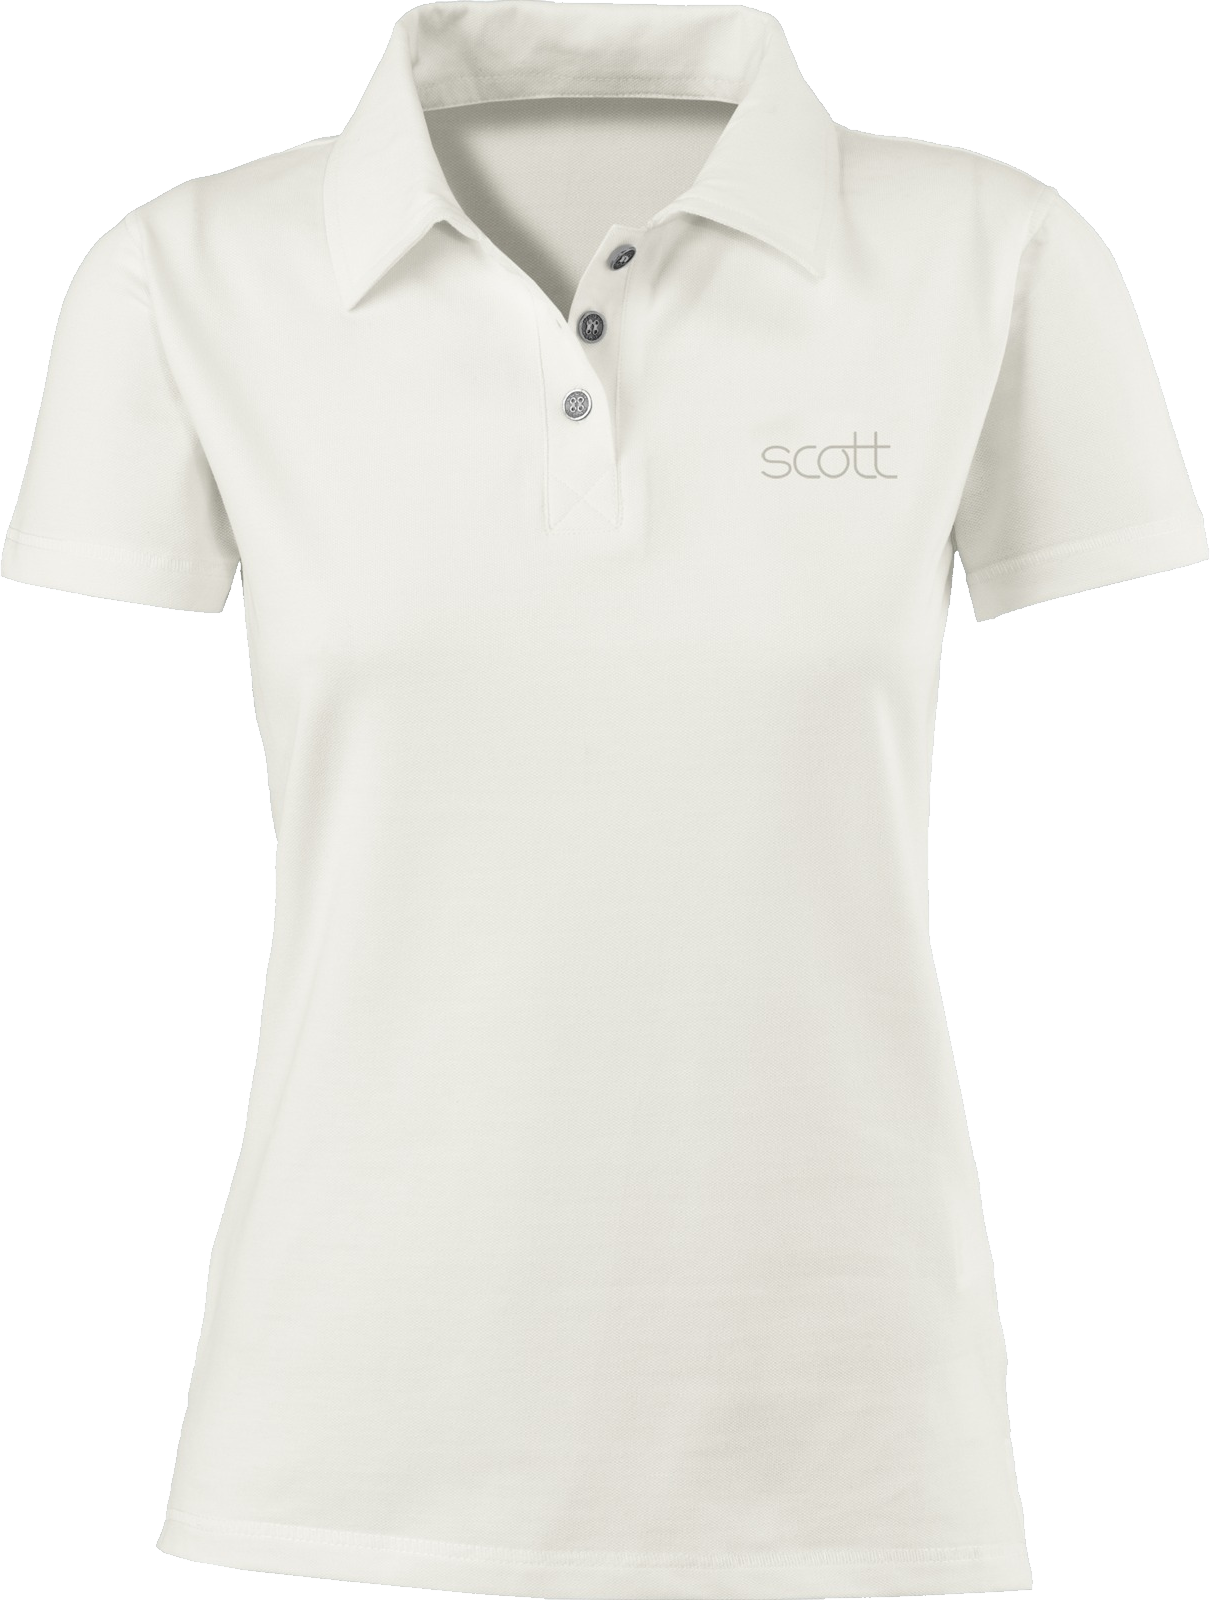 Polo Shirt Png Image - Blouse, Transparent background PNG HD thumbnail